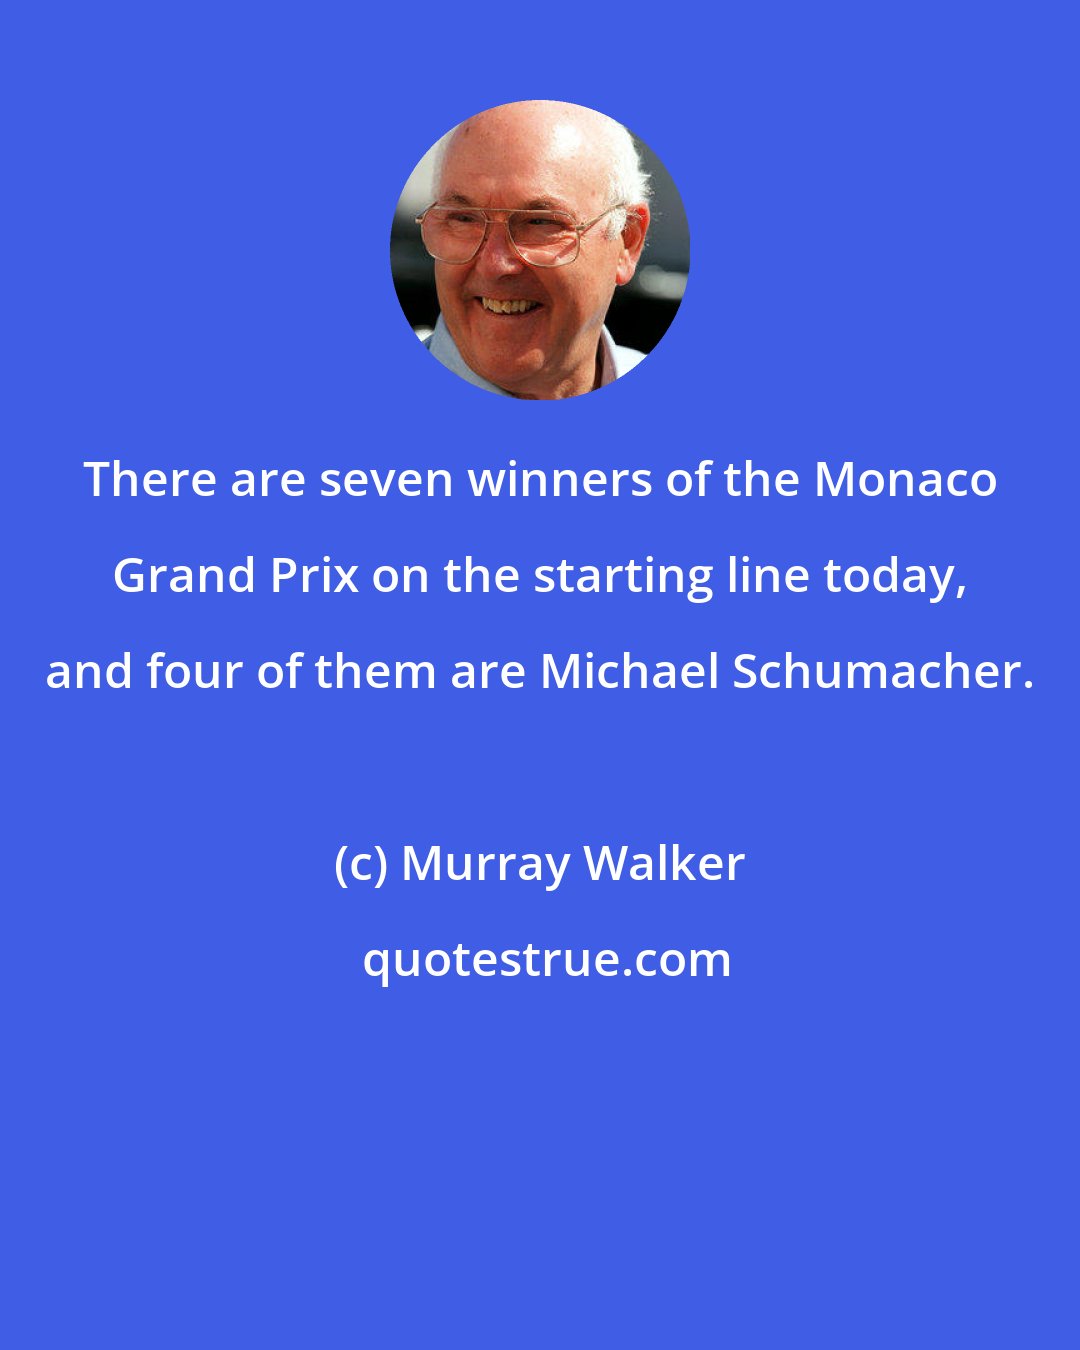 Murray Walker: There are seven winners of the Monaco Grand Prix on the starting line today, and four of them are Michael Schumacher.